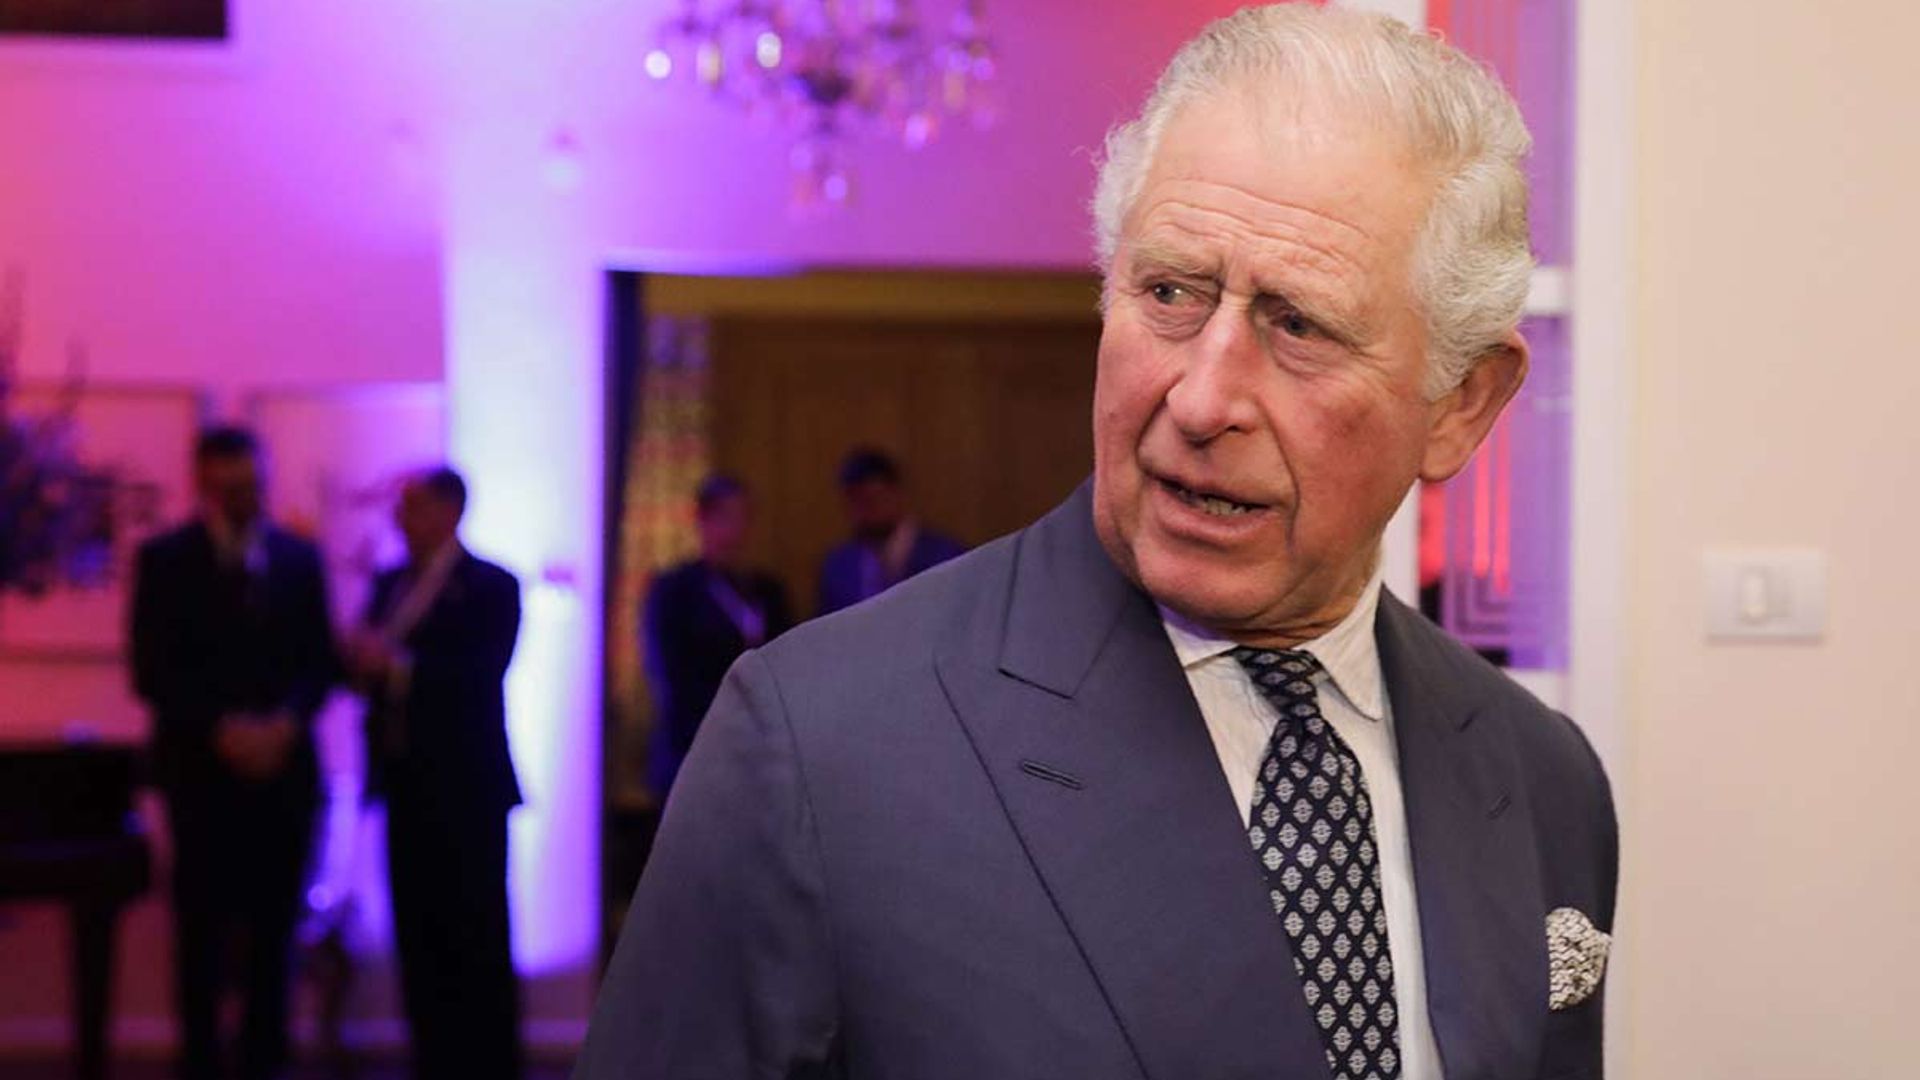 Prince-Charles-memorial-event